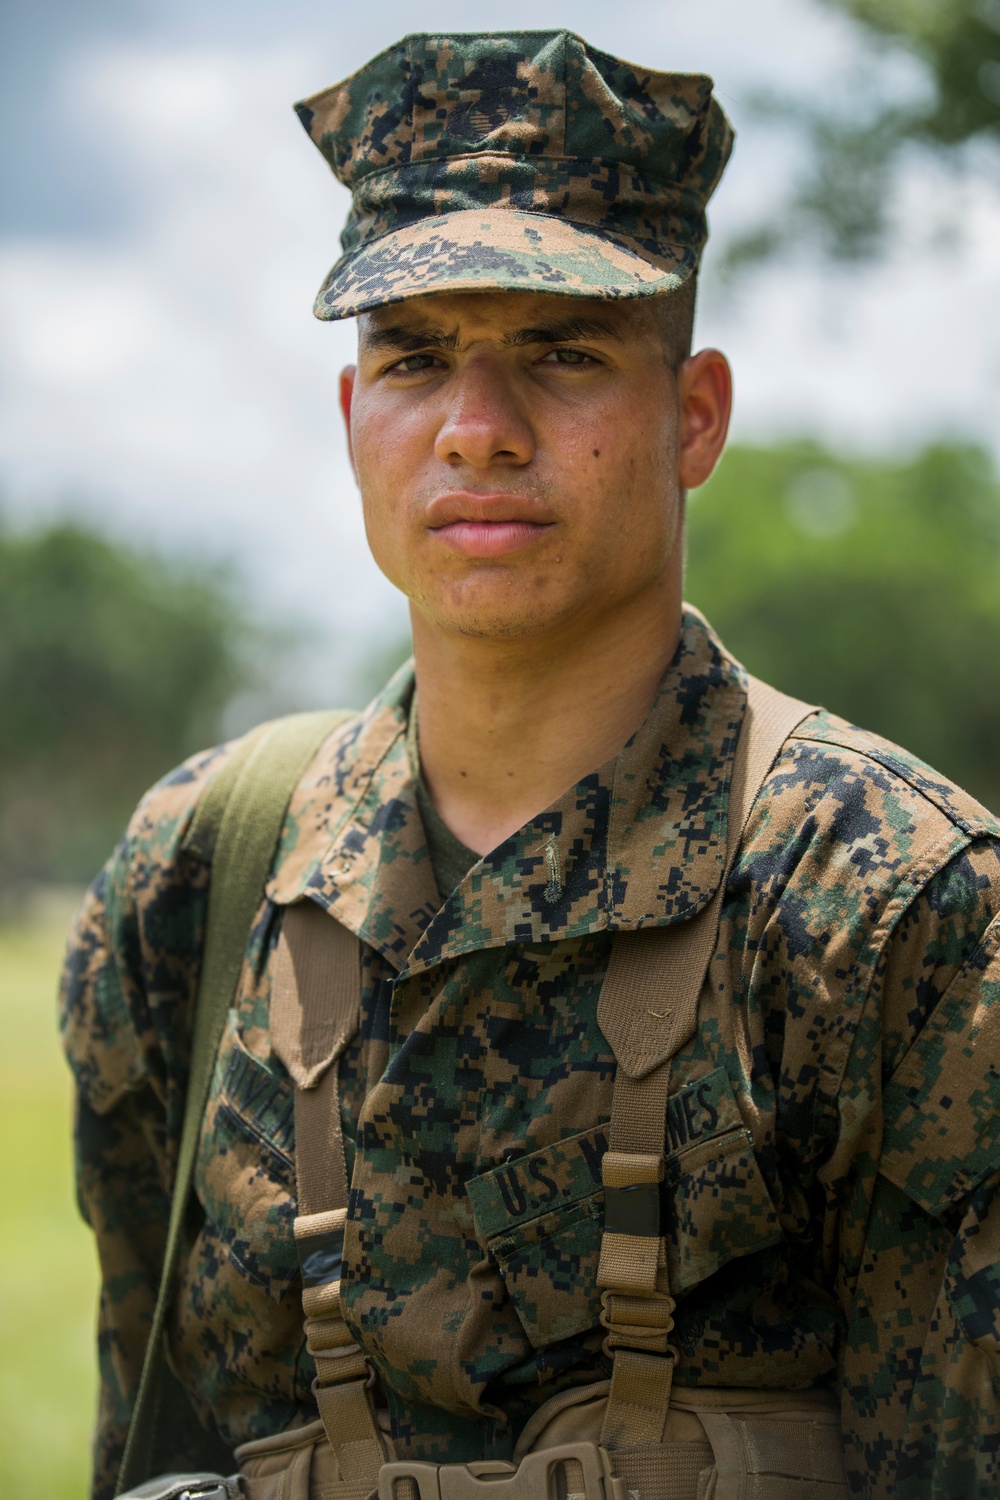 Dumont, N.J., native training at Parris Island to become U.S. Marine